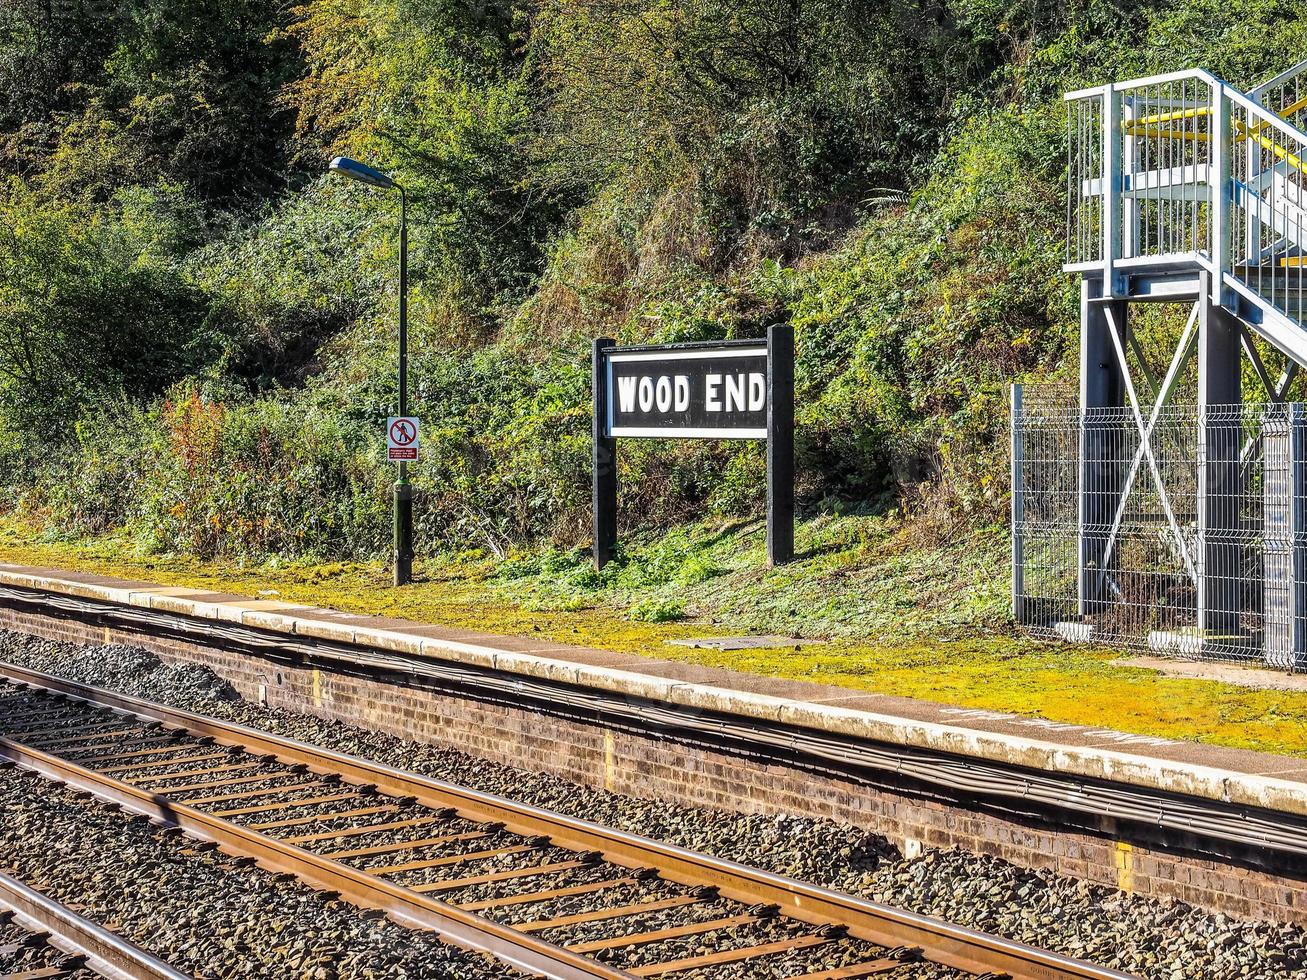 HDR Wood End station in Tanworth in Arden photo